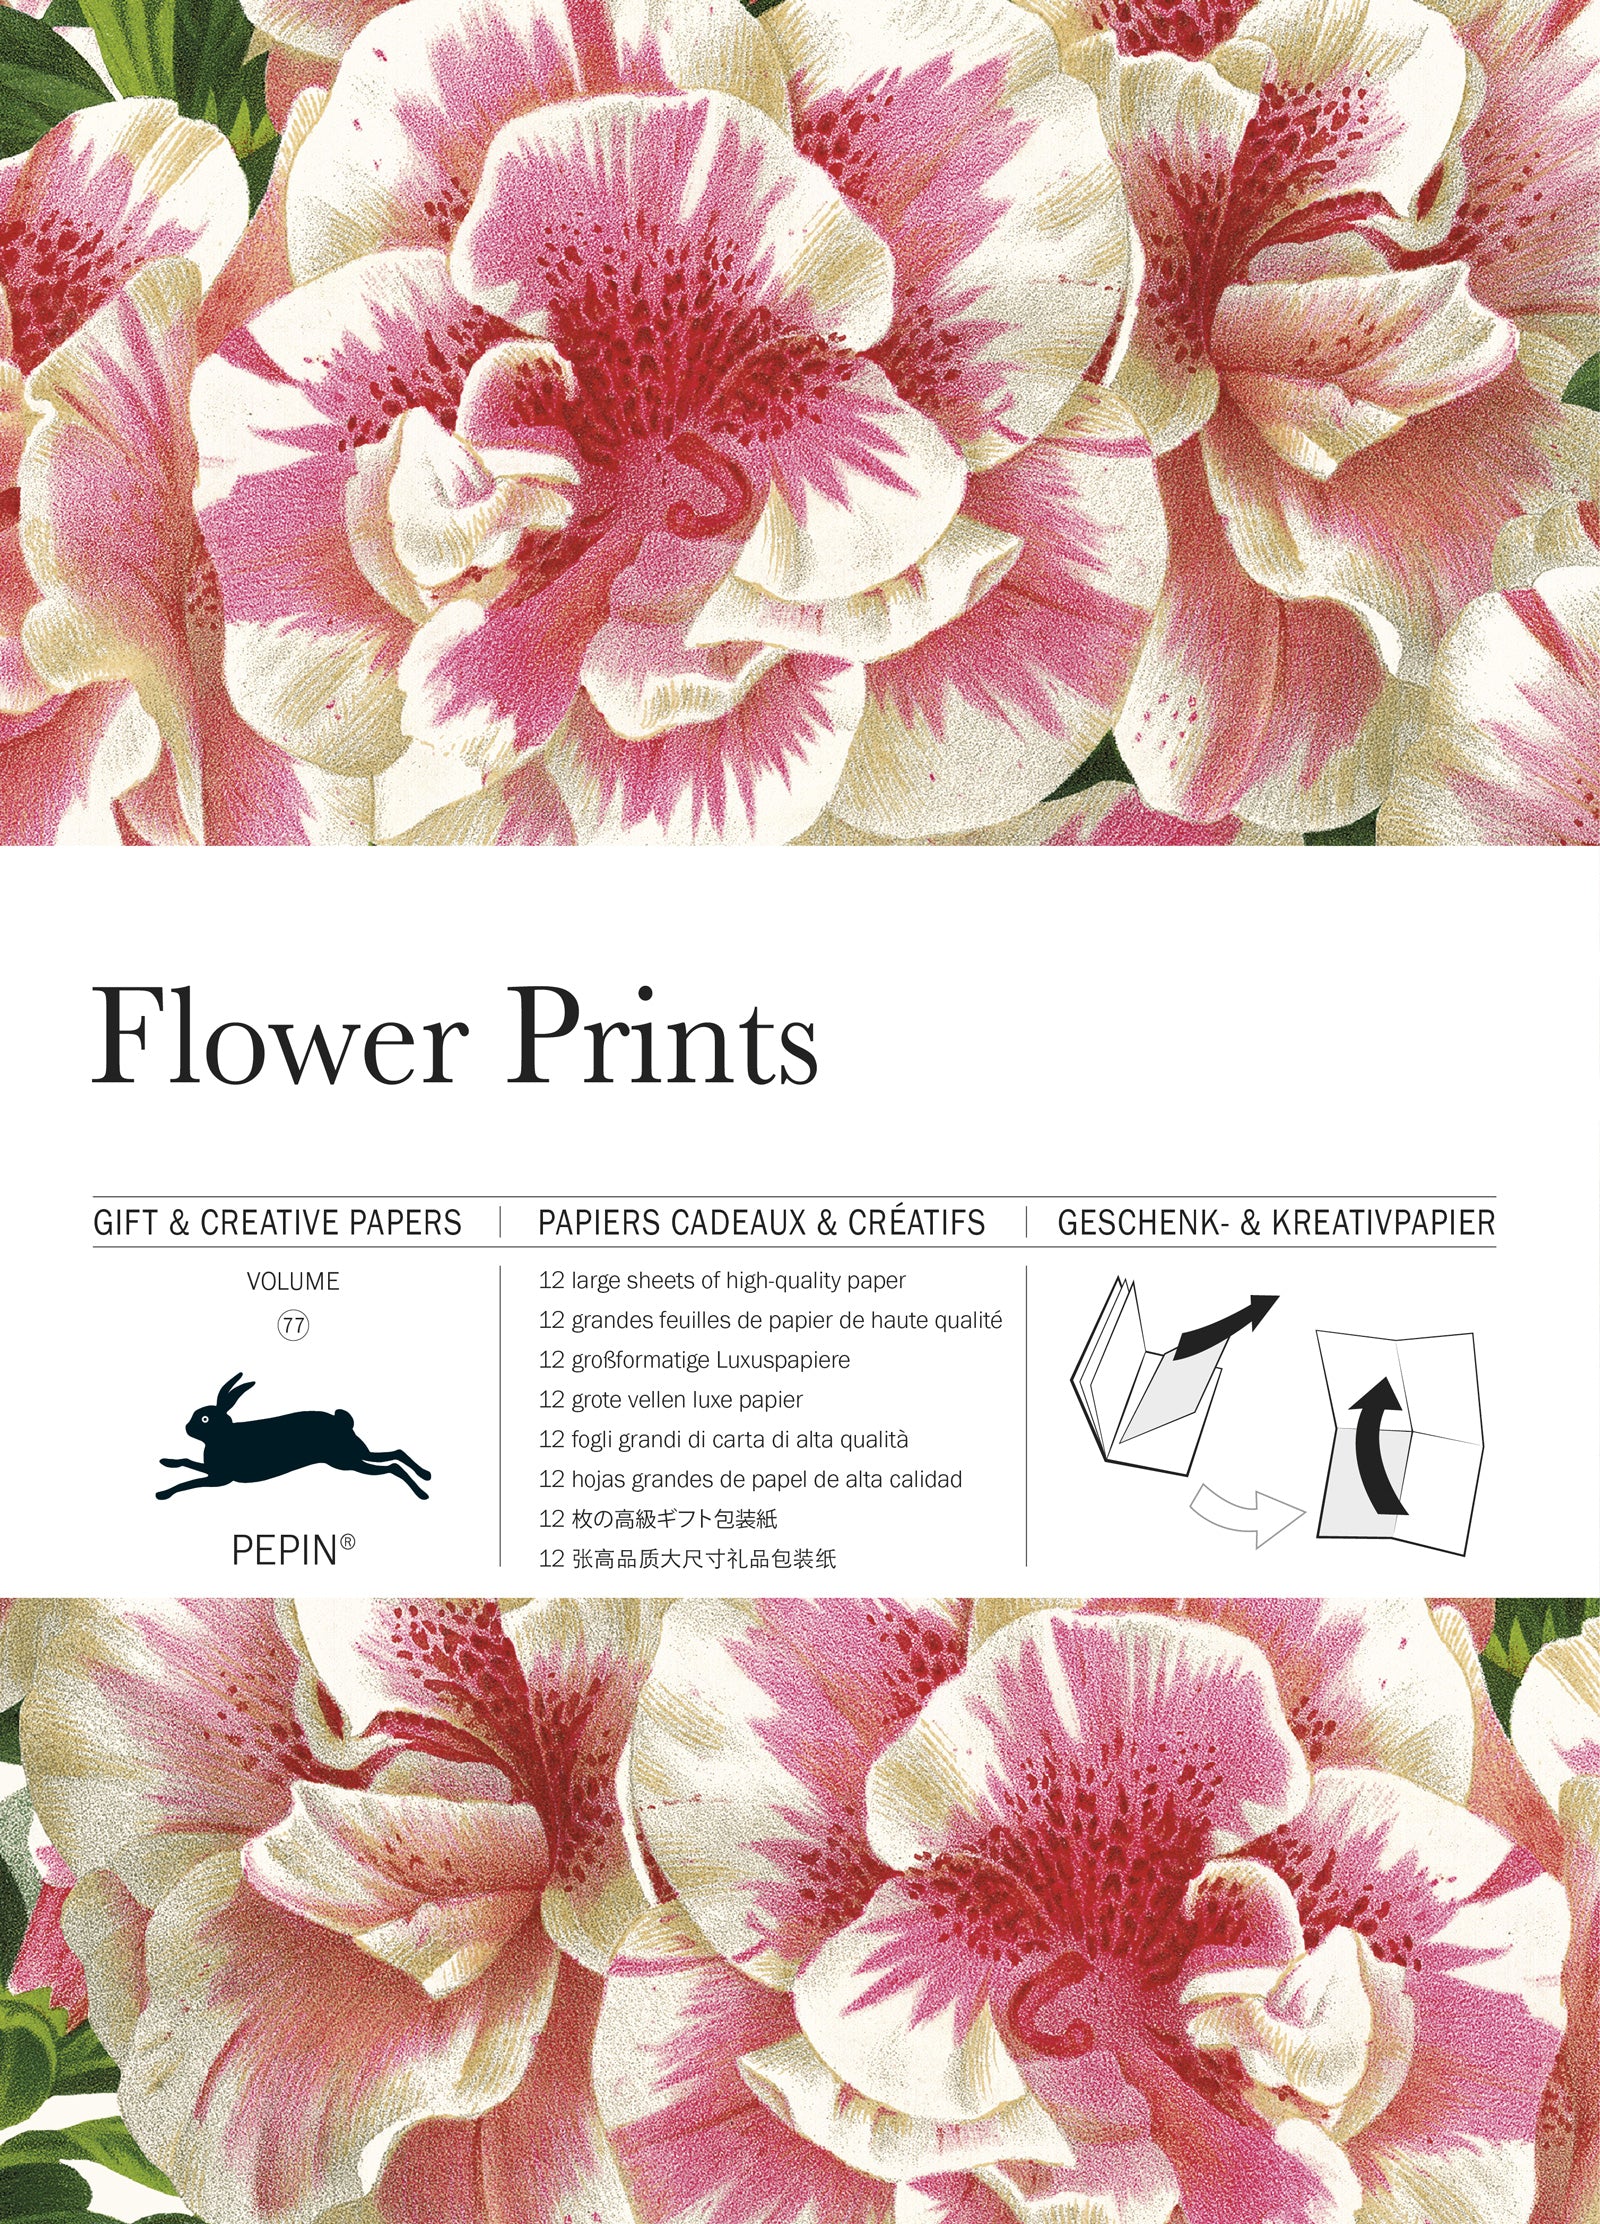 Gift &amp; creative papers - Flower Prints